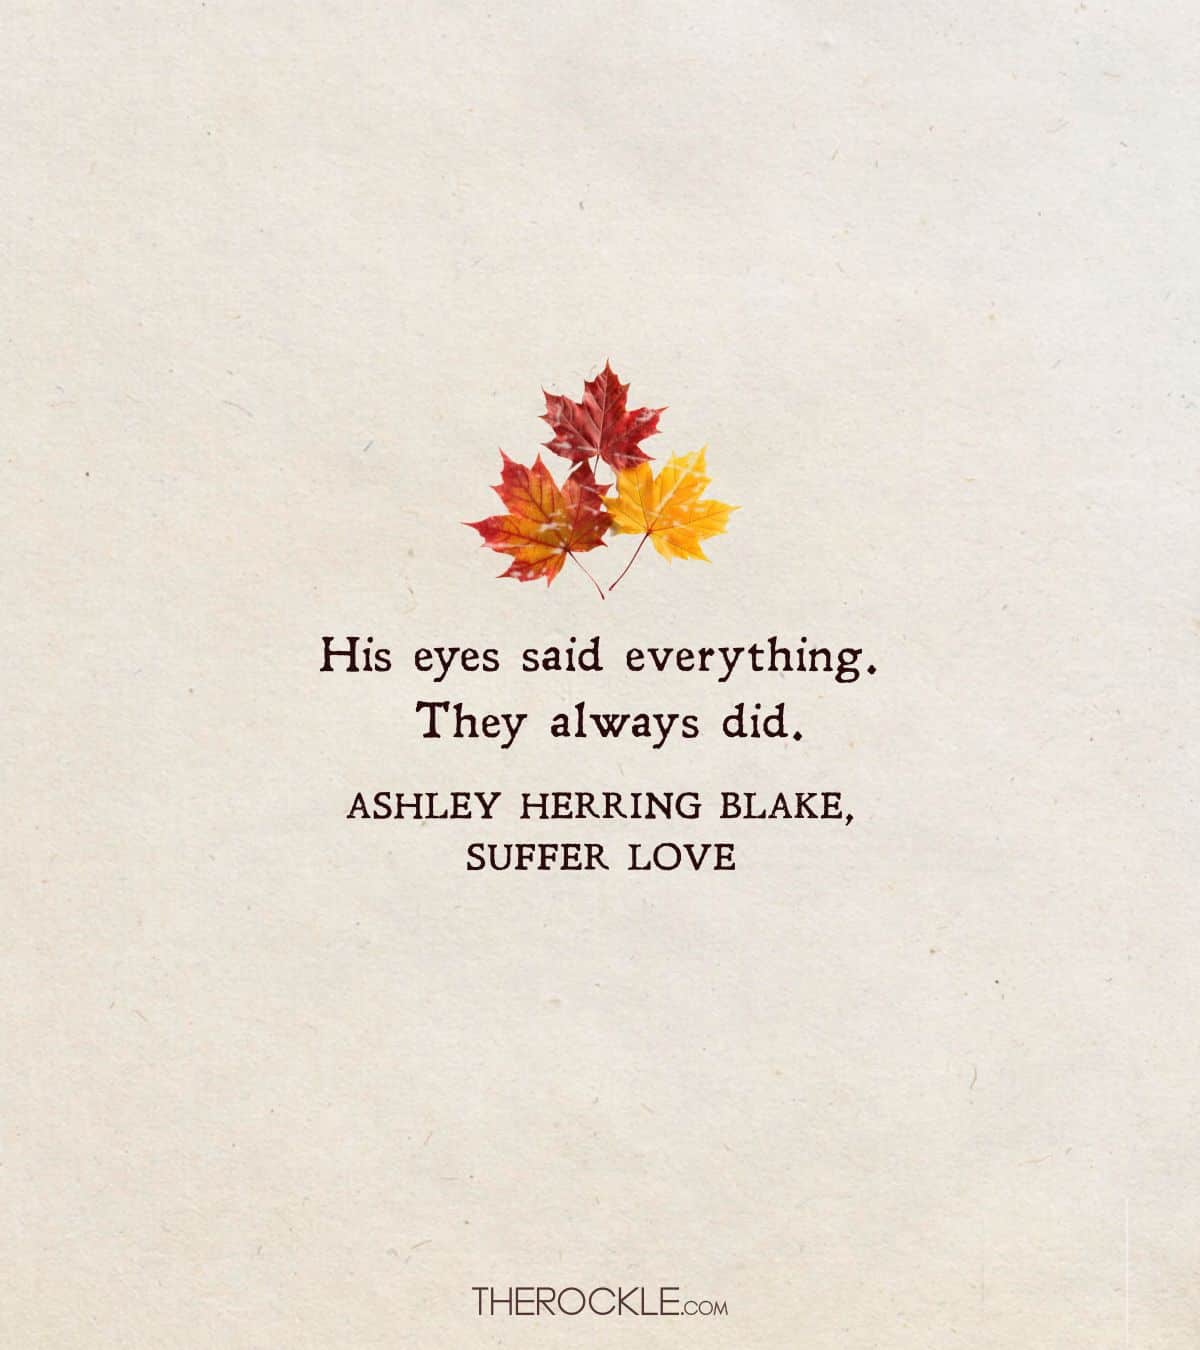 Quote from Suffer Love by Ashley Herring Blake